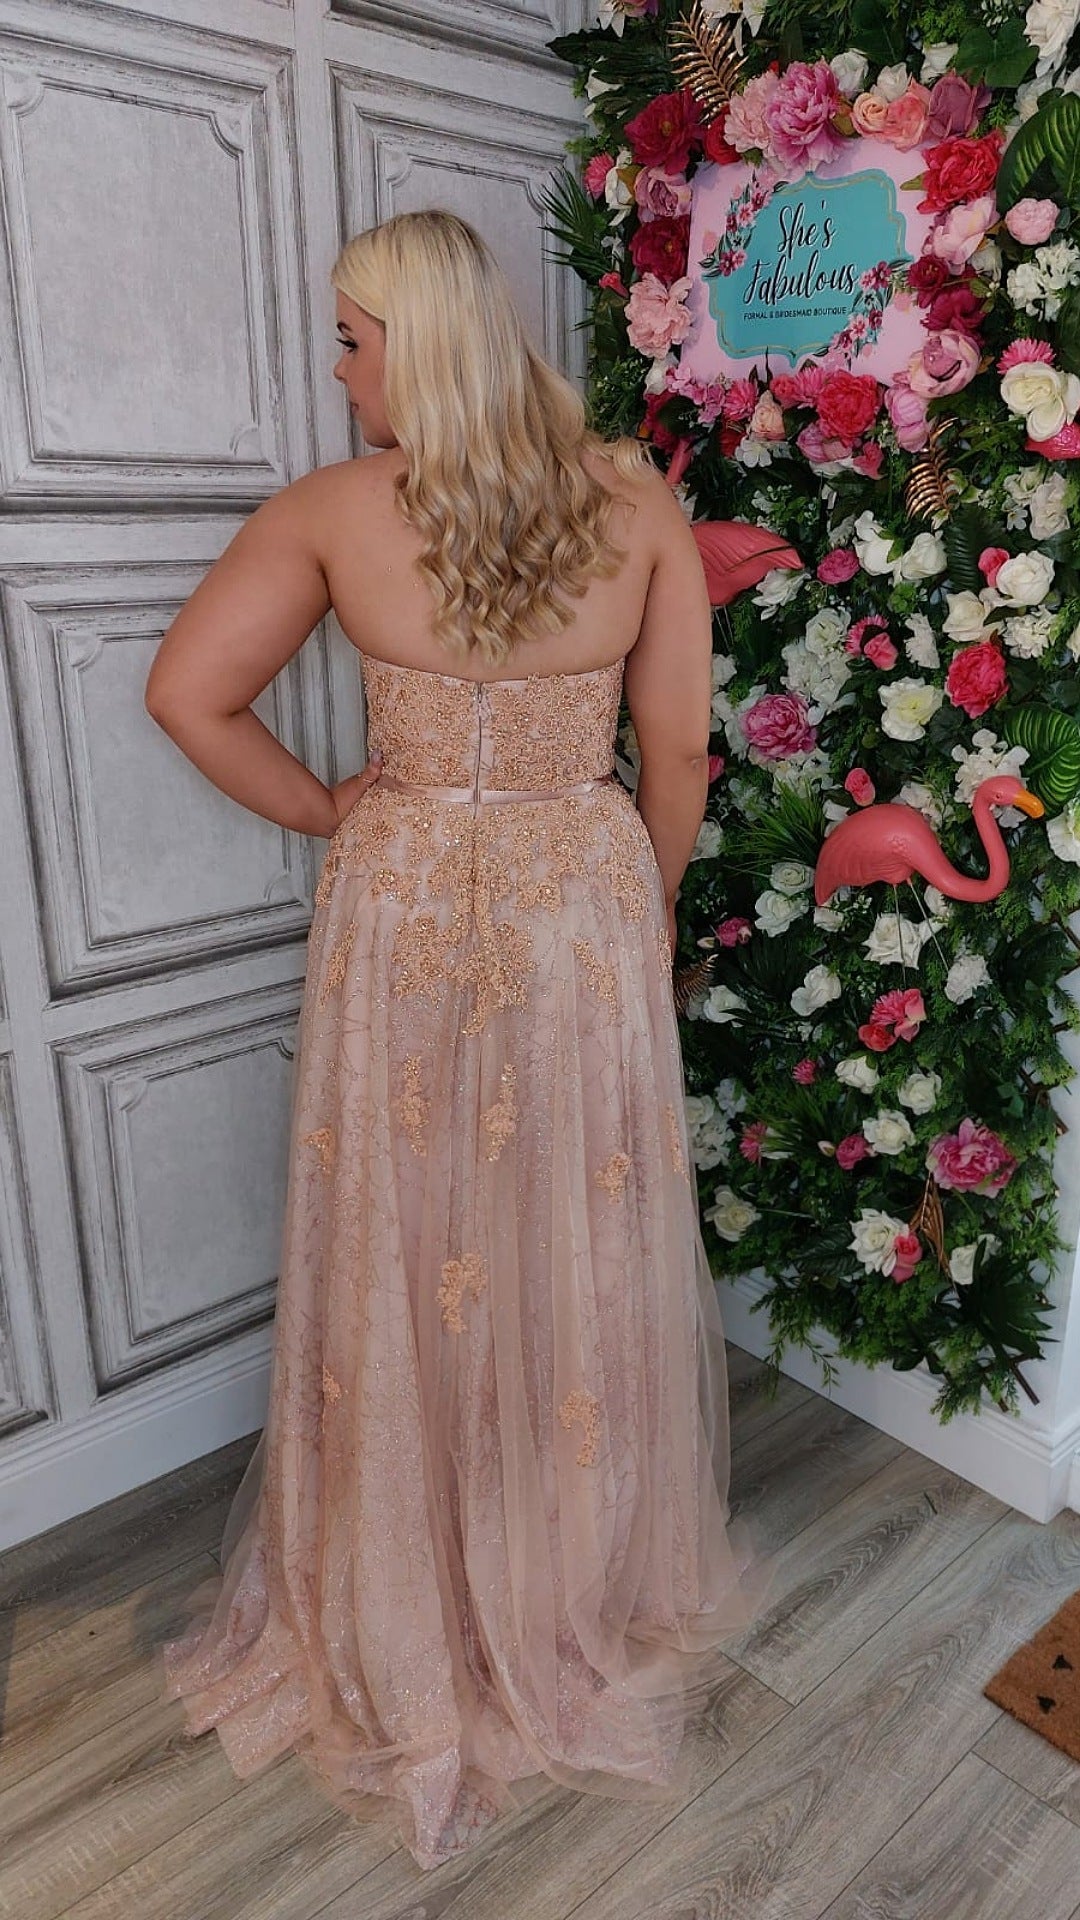 Eloise Peach And Rose Gold Strapless Sweetheart Ball gown Formal Prom Dress